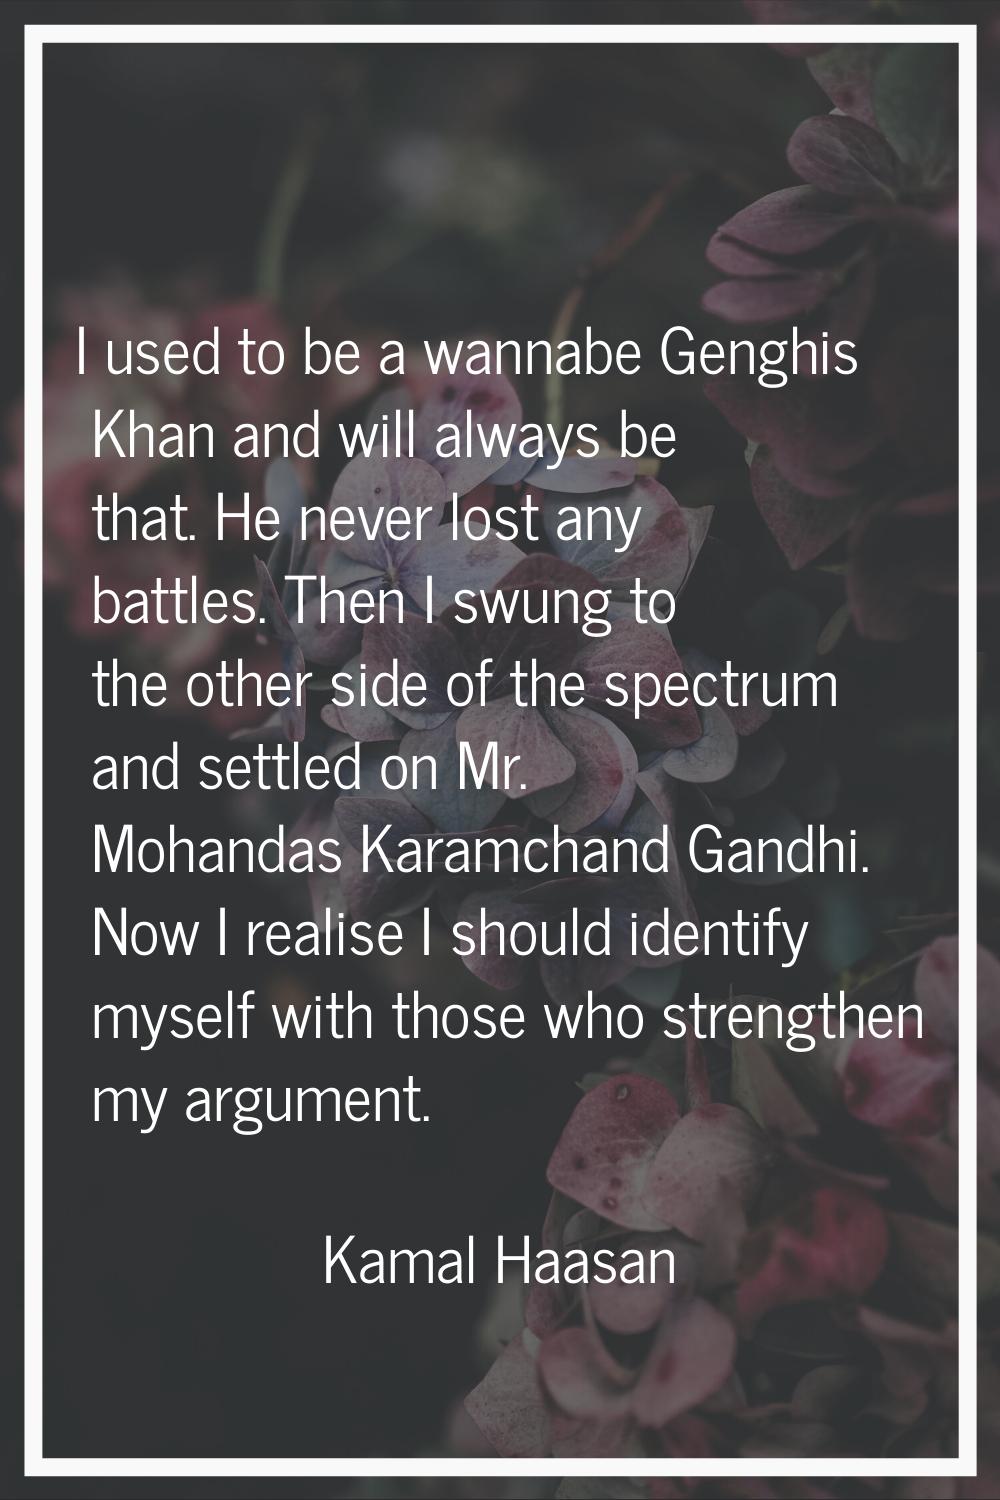 I used to be a wannabe Genghis Khan and will always be that. He never lost any battles. Then I swun